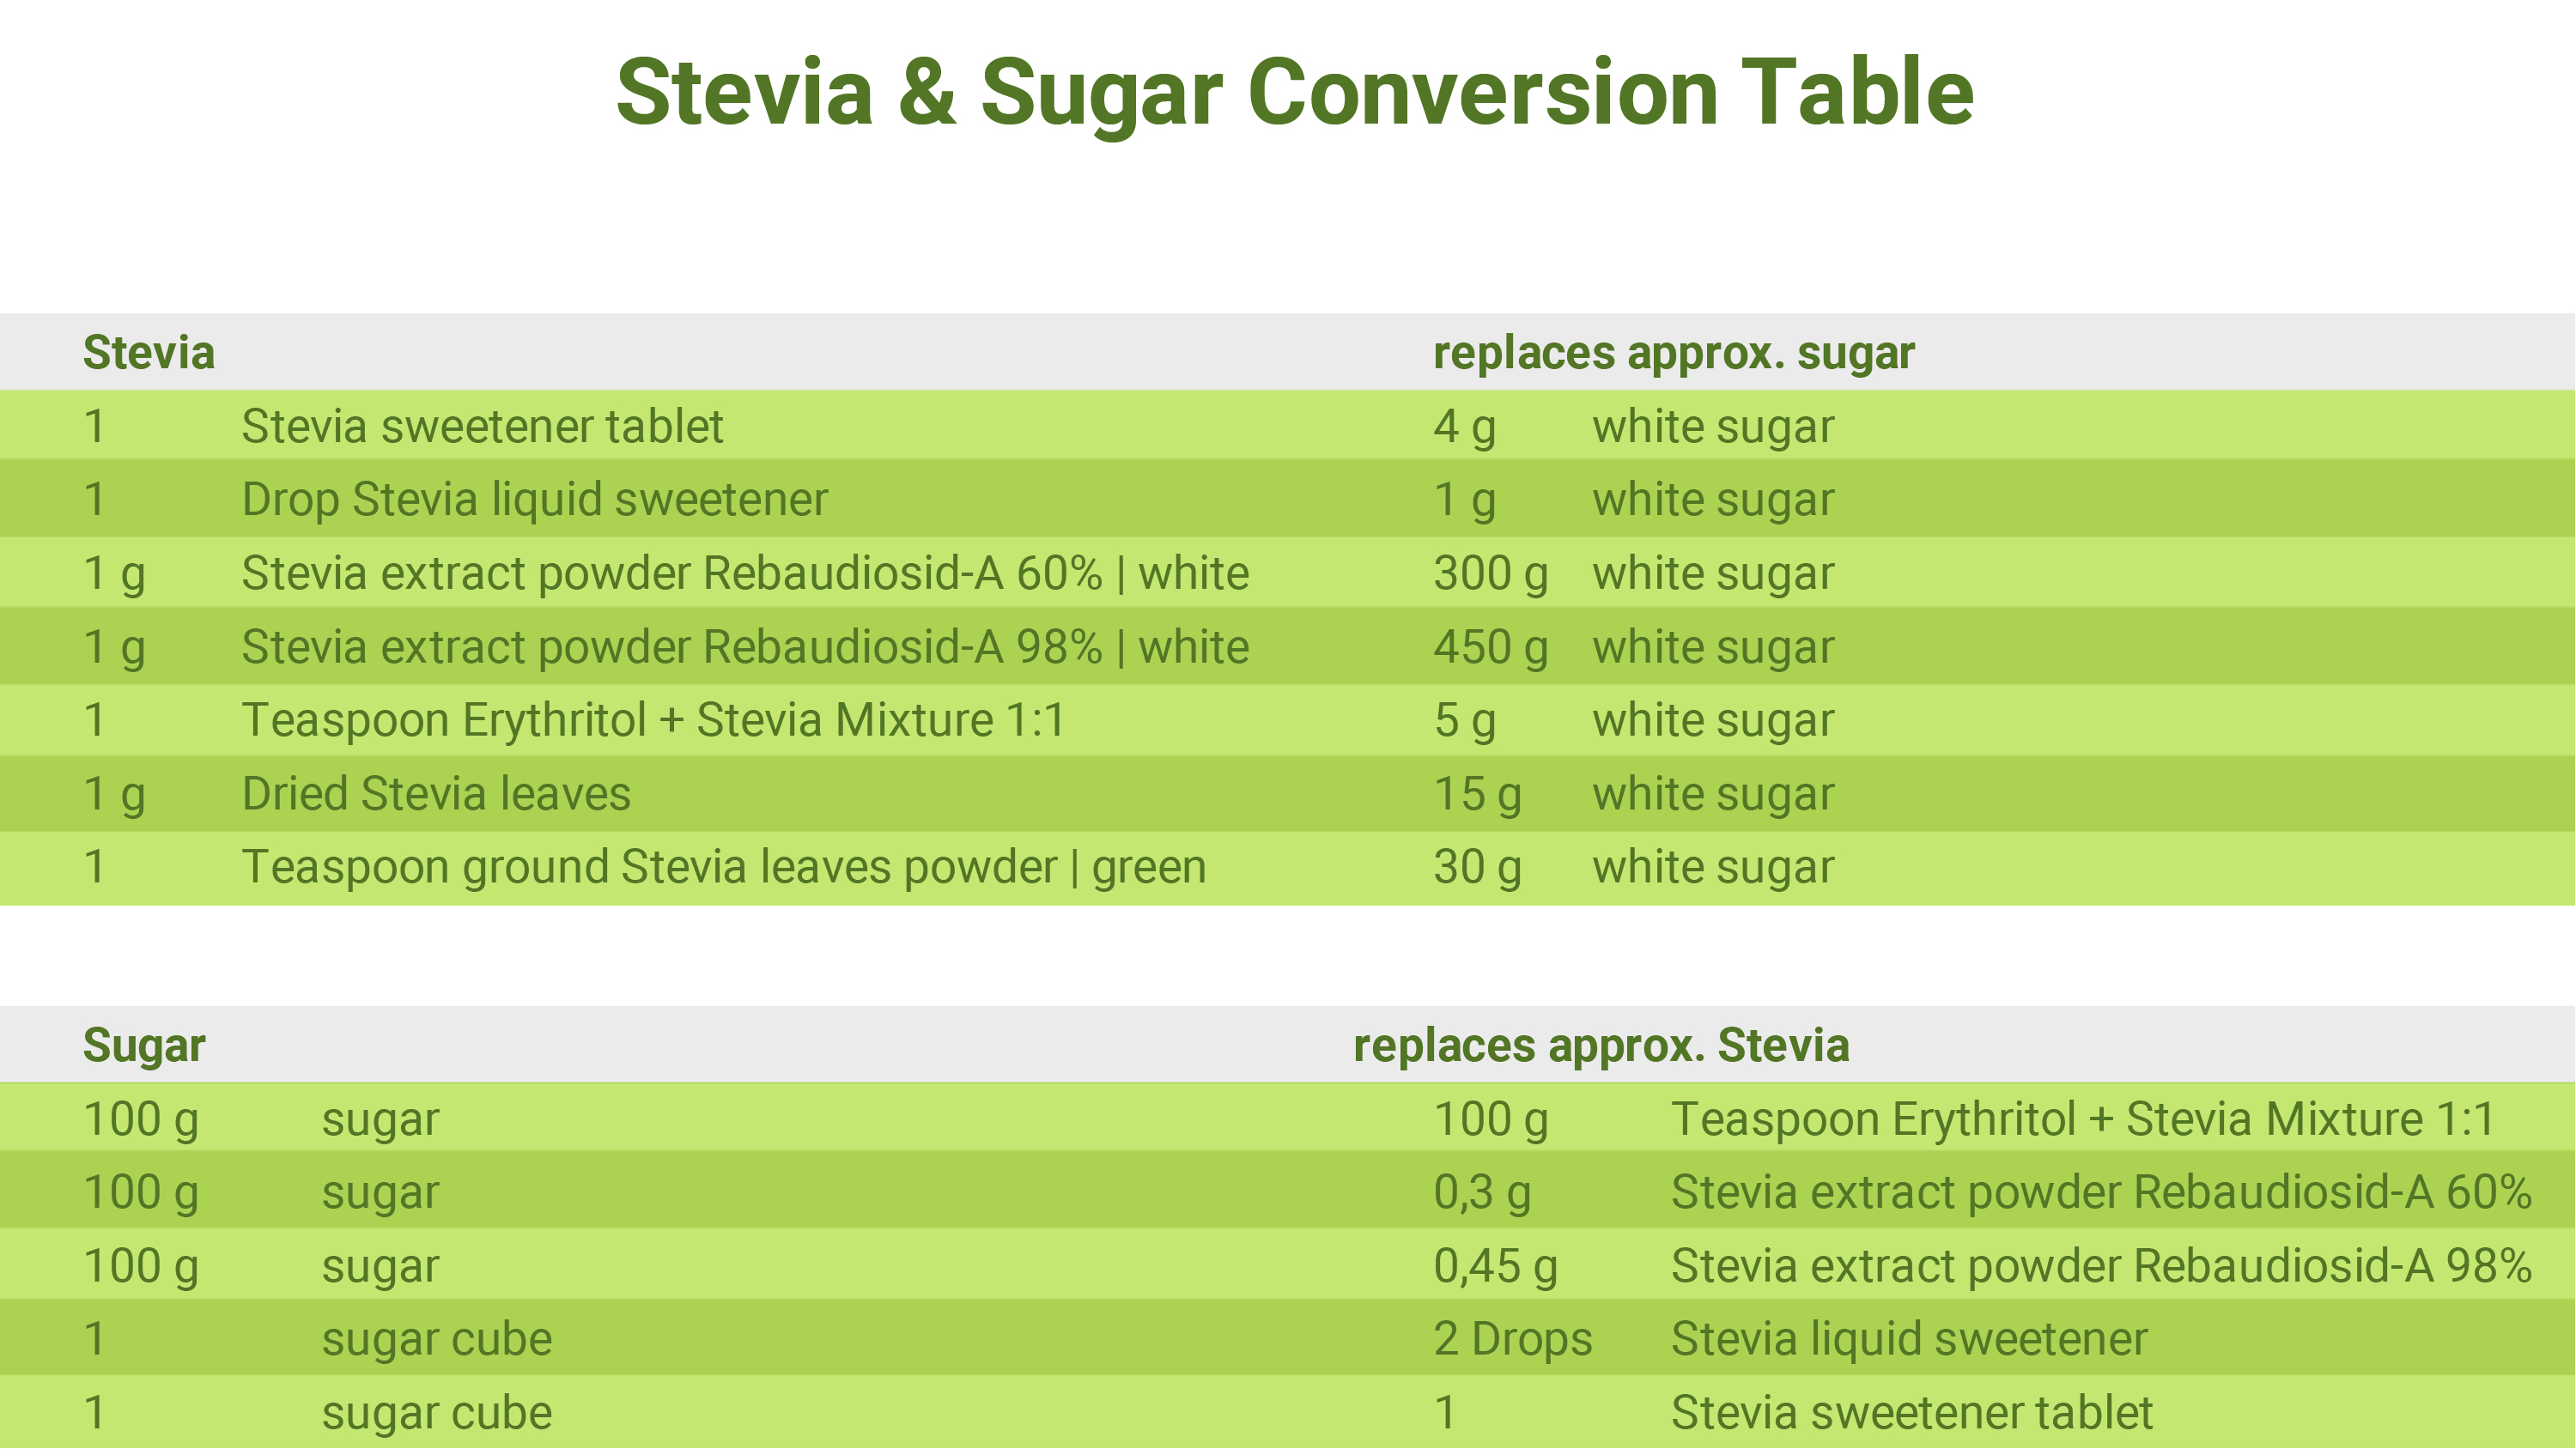 How can I replace sugar with Stevia? Questions and answers